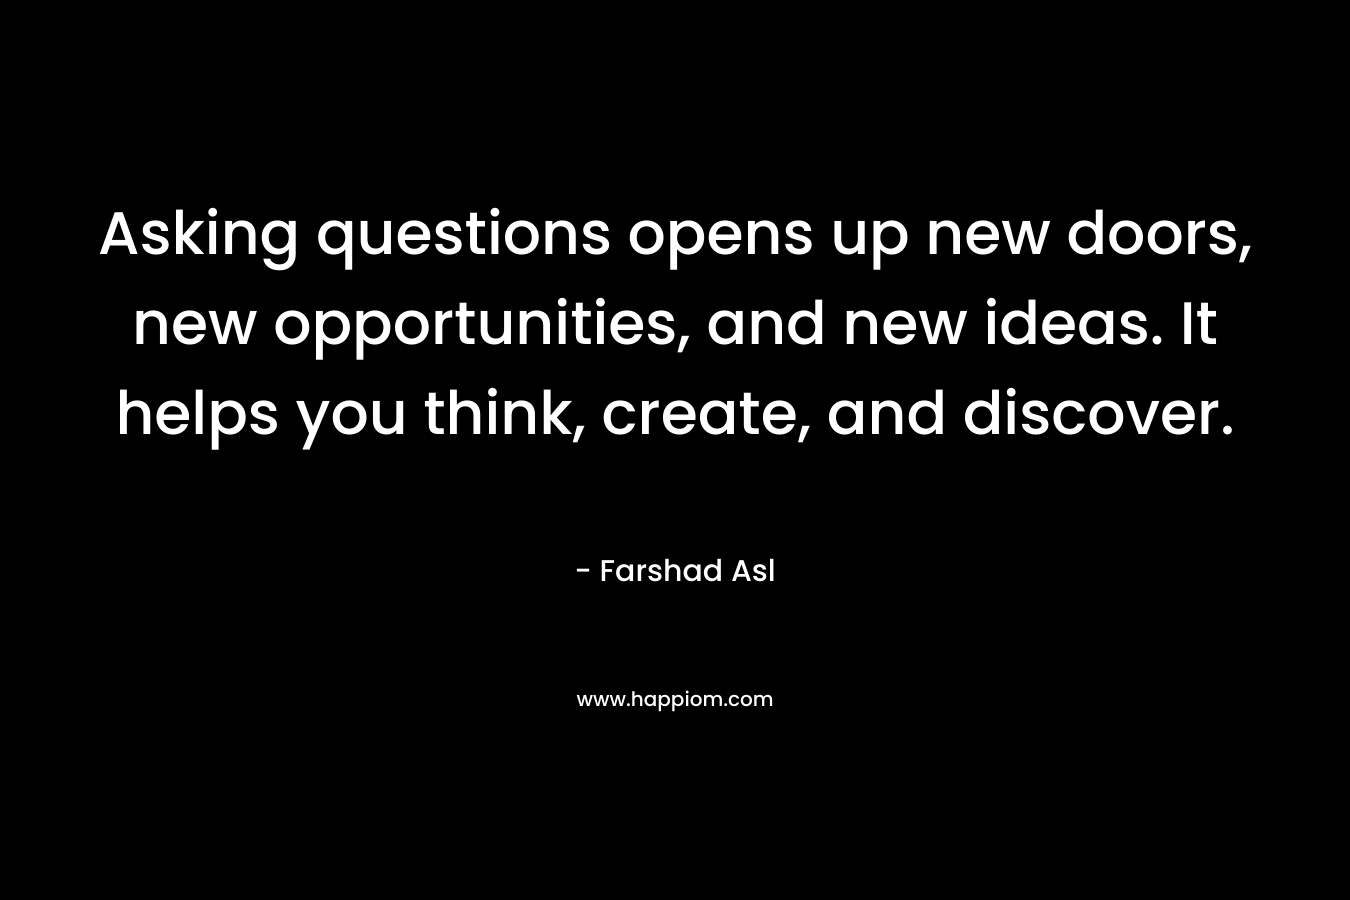 Asking questions opens up new doors, new opportunities, and new ideas. It helps you think, create, and discover. – Farshad Asl